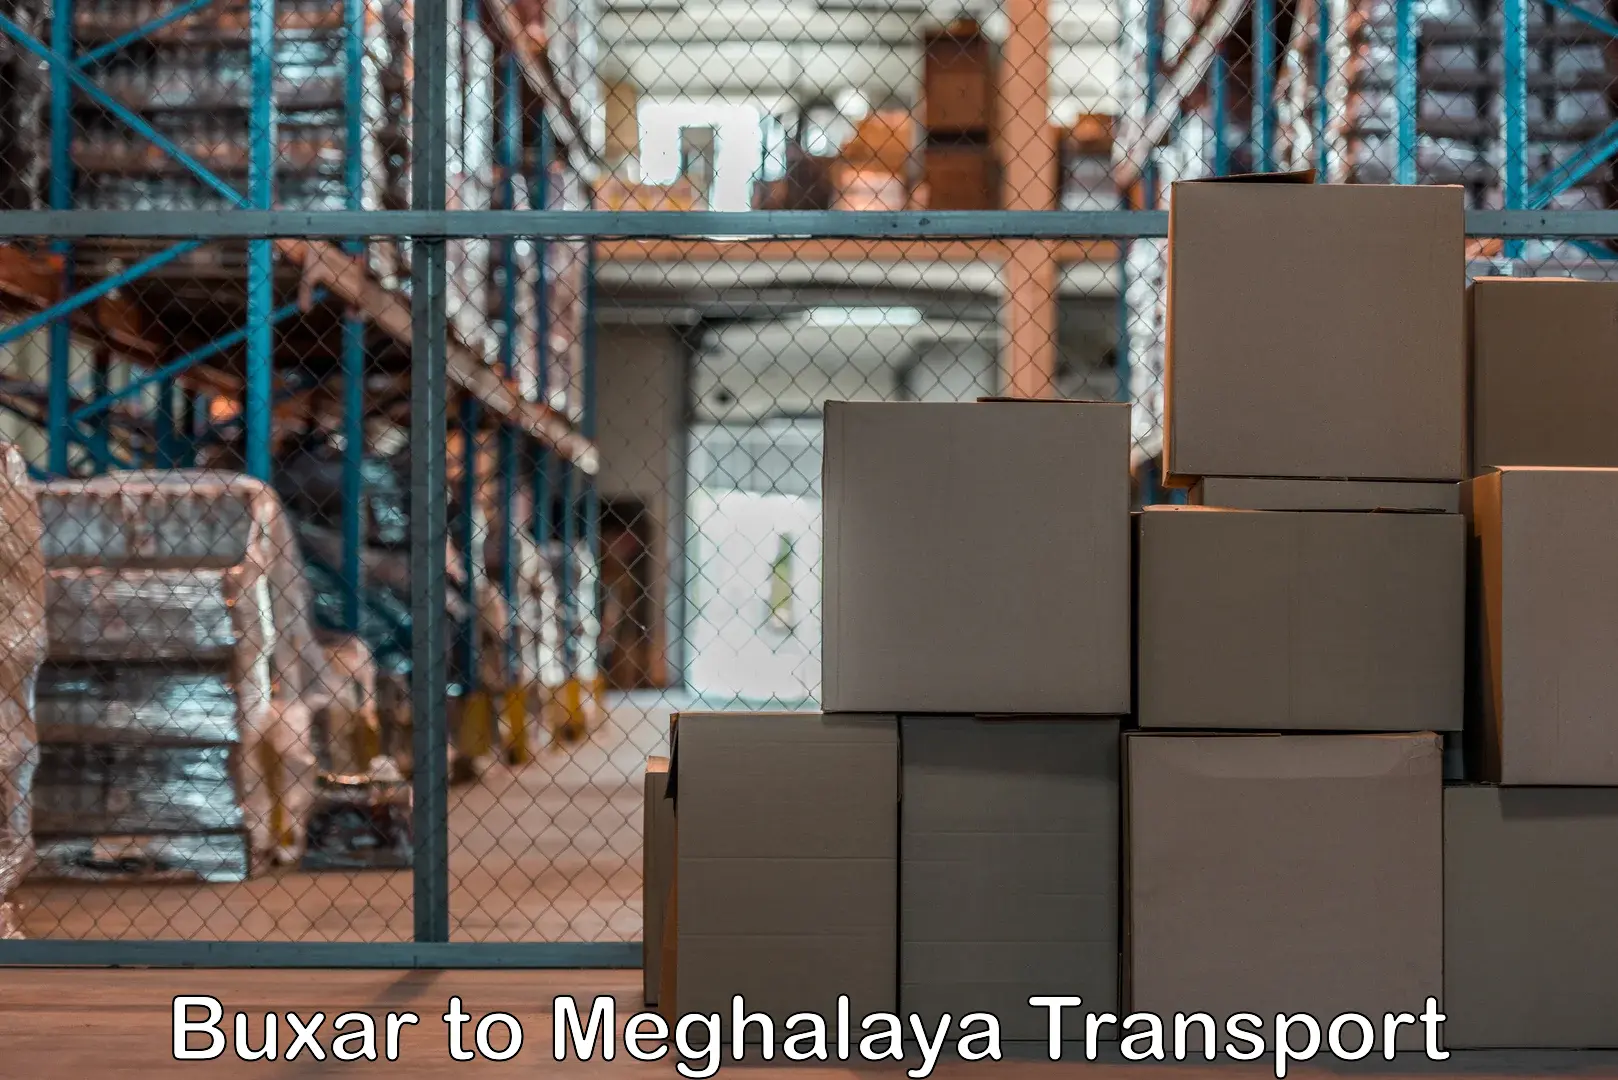 Container transport service in Buxar to Shillong